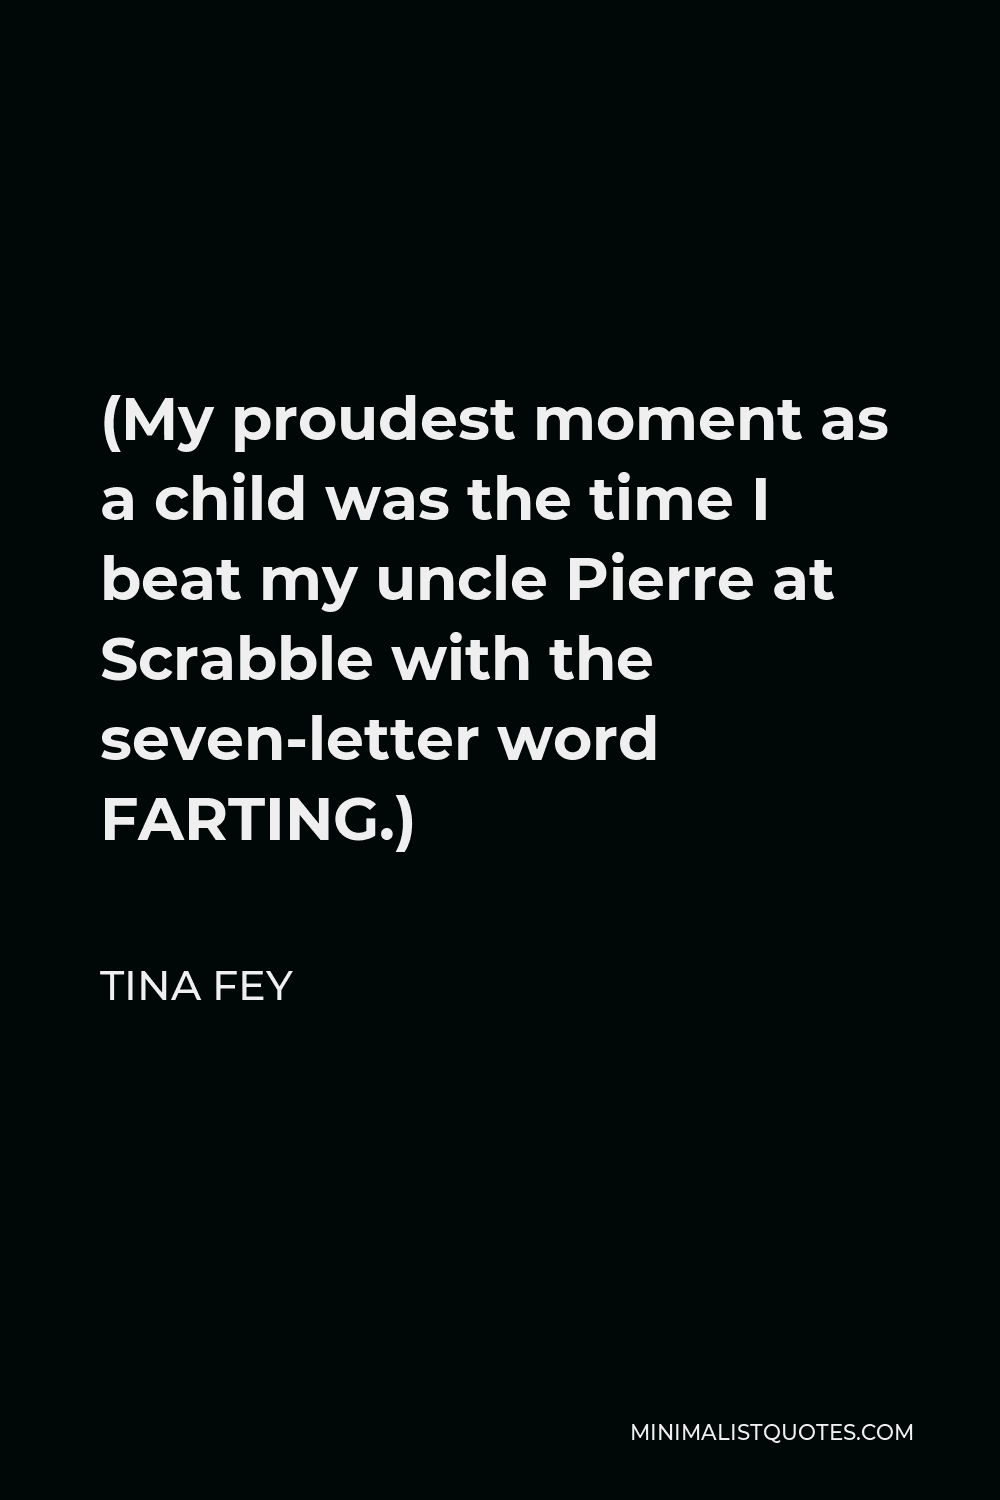 Tina Fey Quote - (My proudest moment as a child was the time I beat my uncle Pierre at Scrabble with the seven-letter word FARTING.)